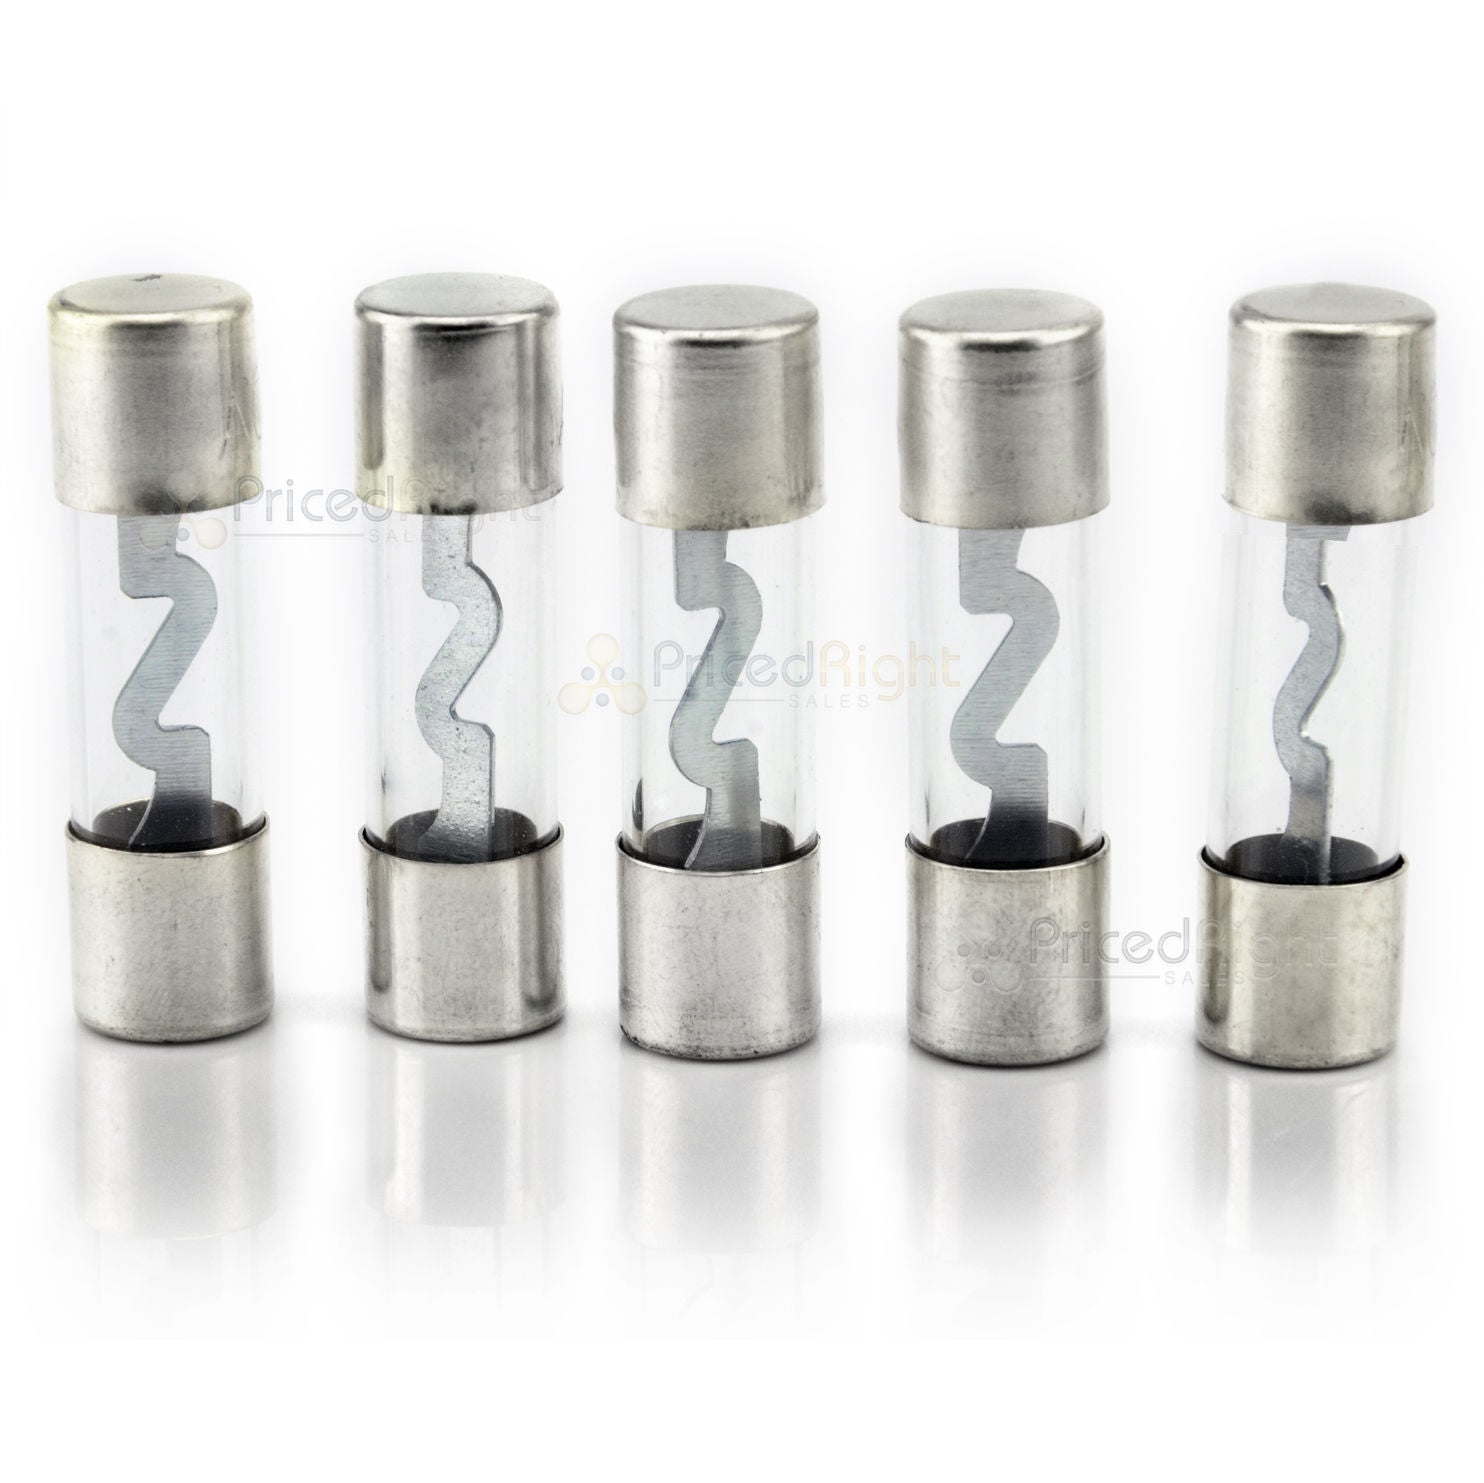 Pack of 5 Car Audio Amp Amplifier Glass 80 A AMP AGU Platinum Plated Fuse